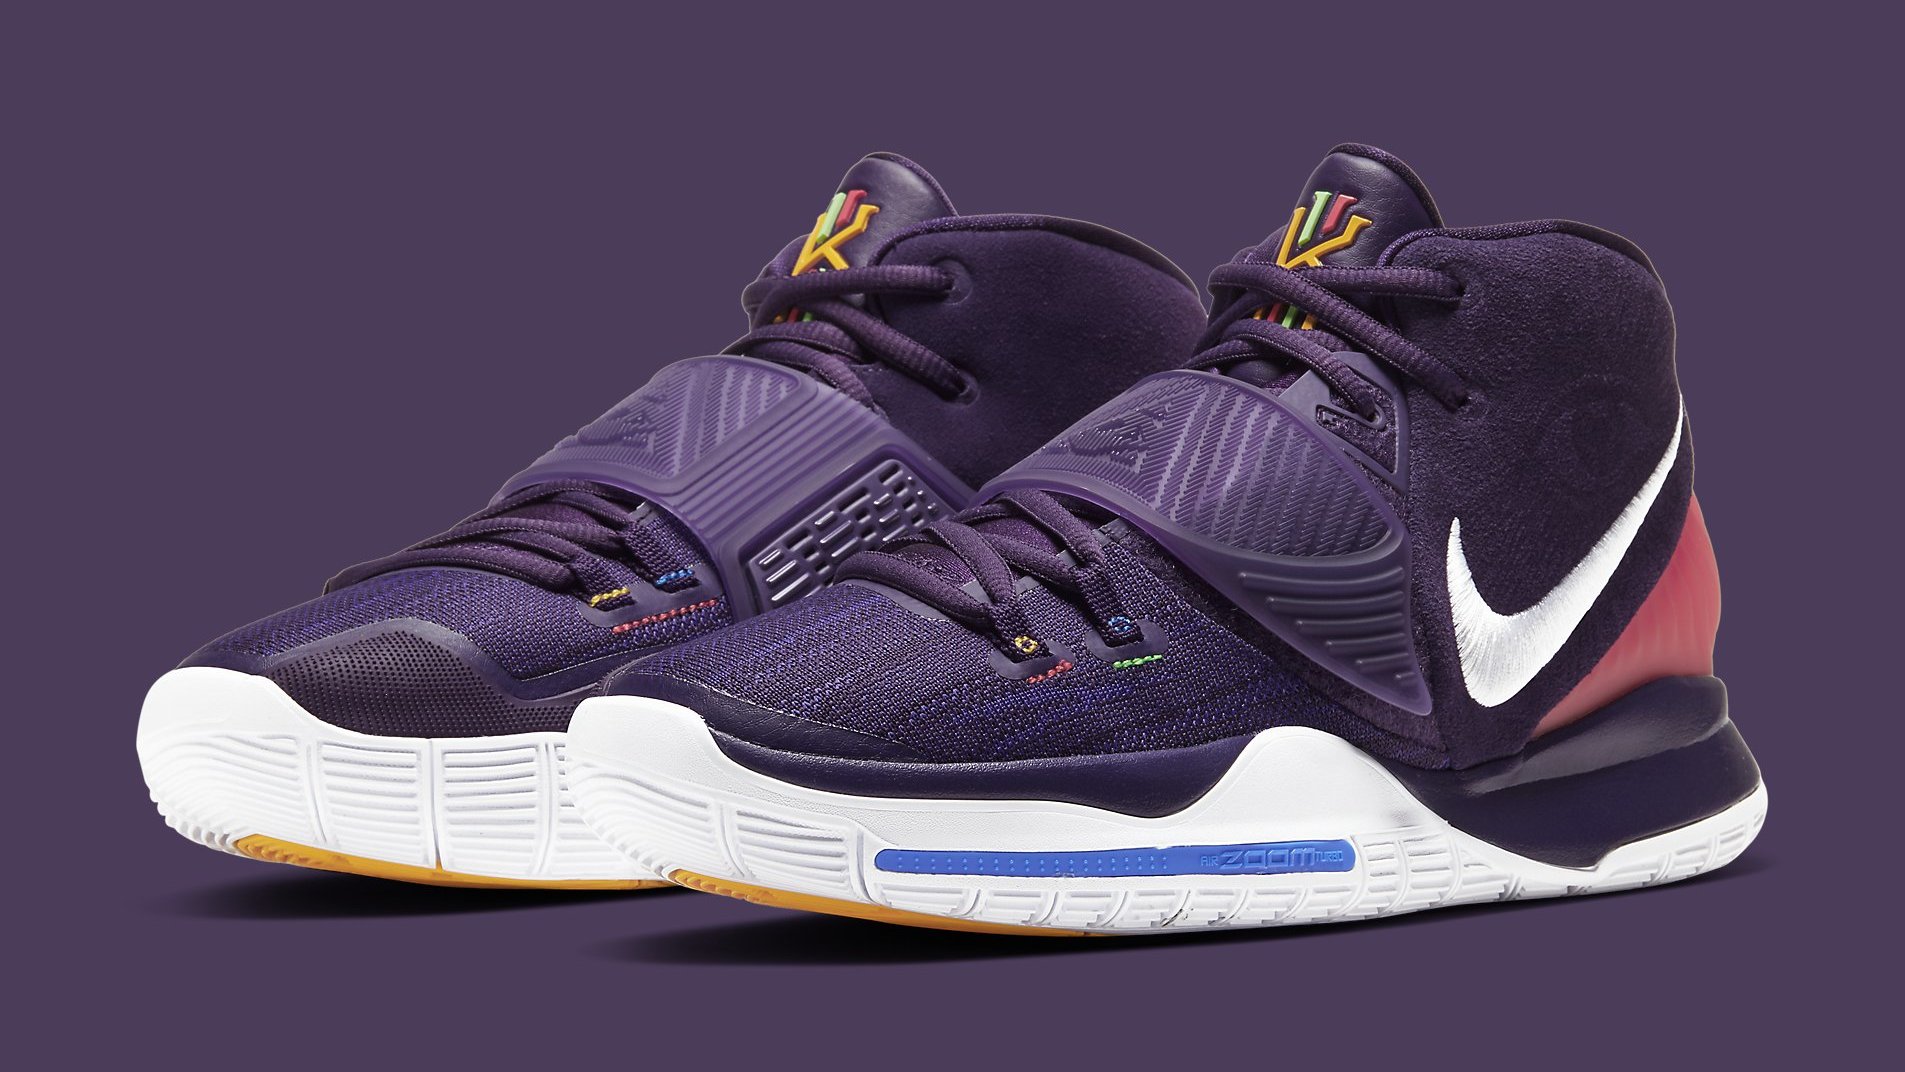 kyrie irving shoes purple